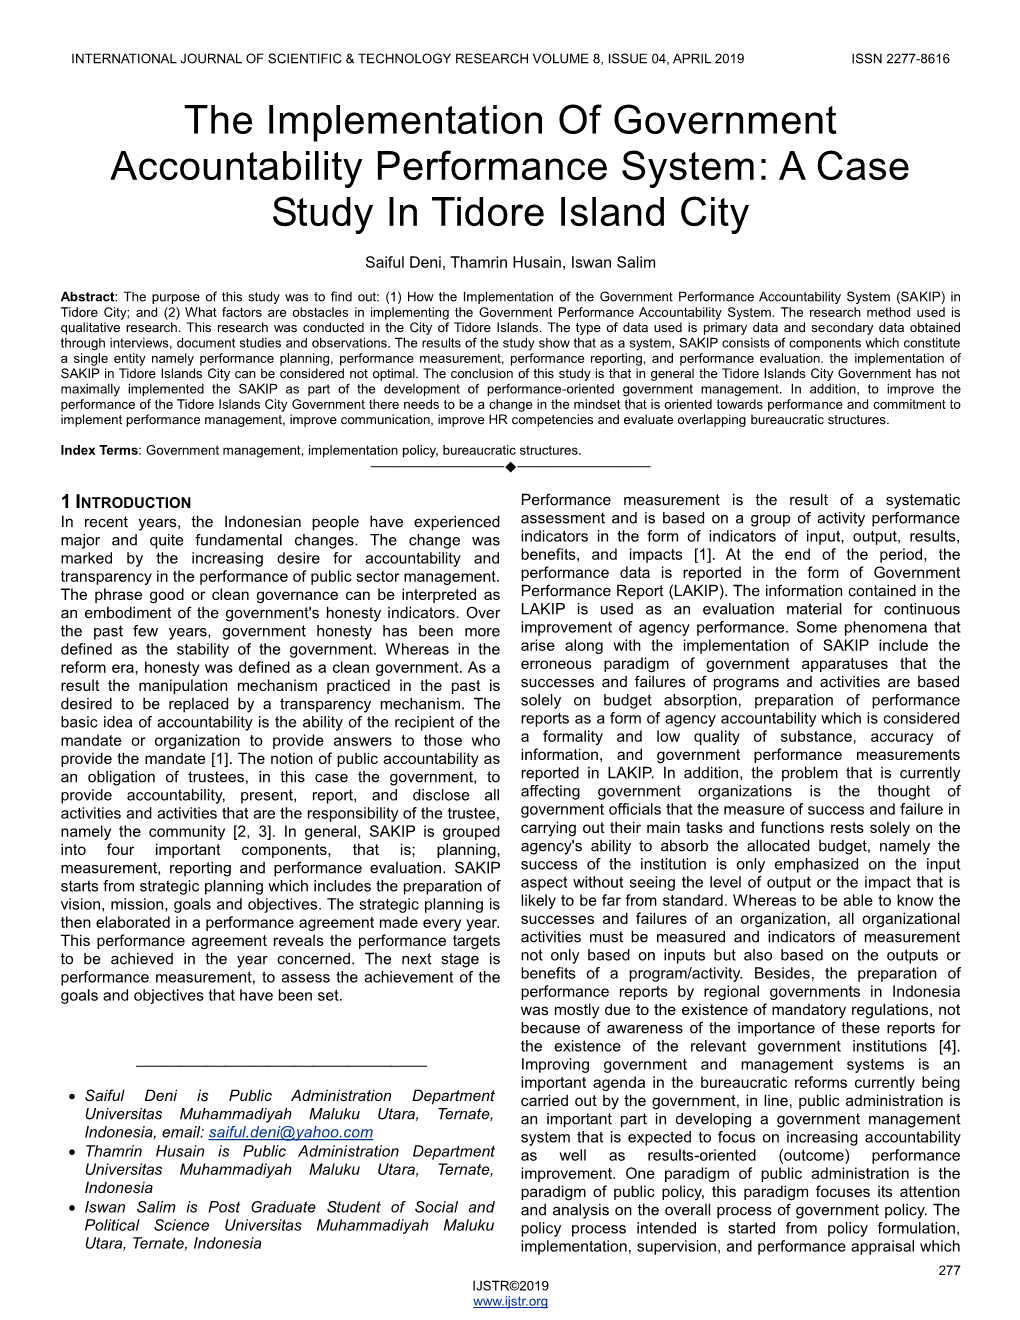 The Implementation of Government Accountability Performance System: a Case Study in Tidore Island City